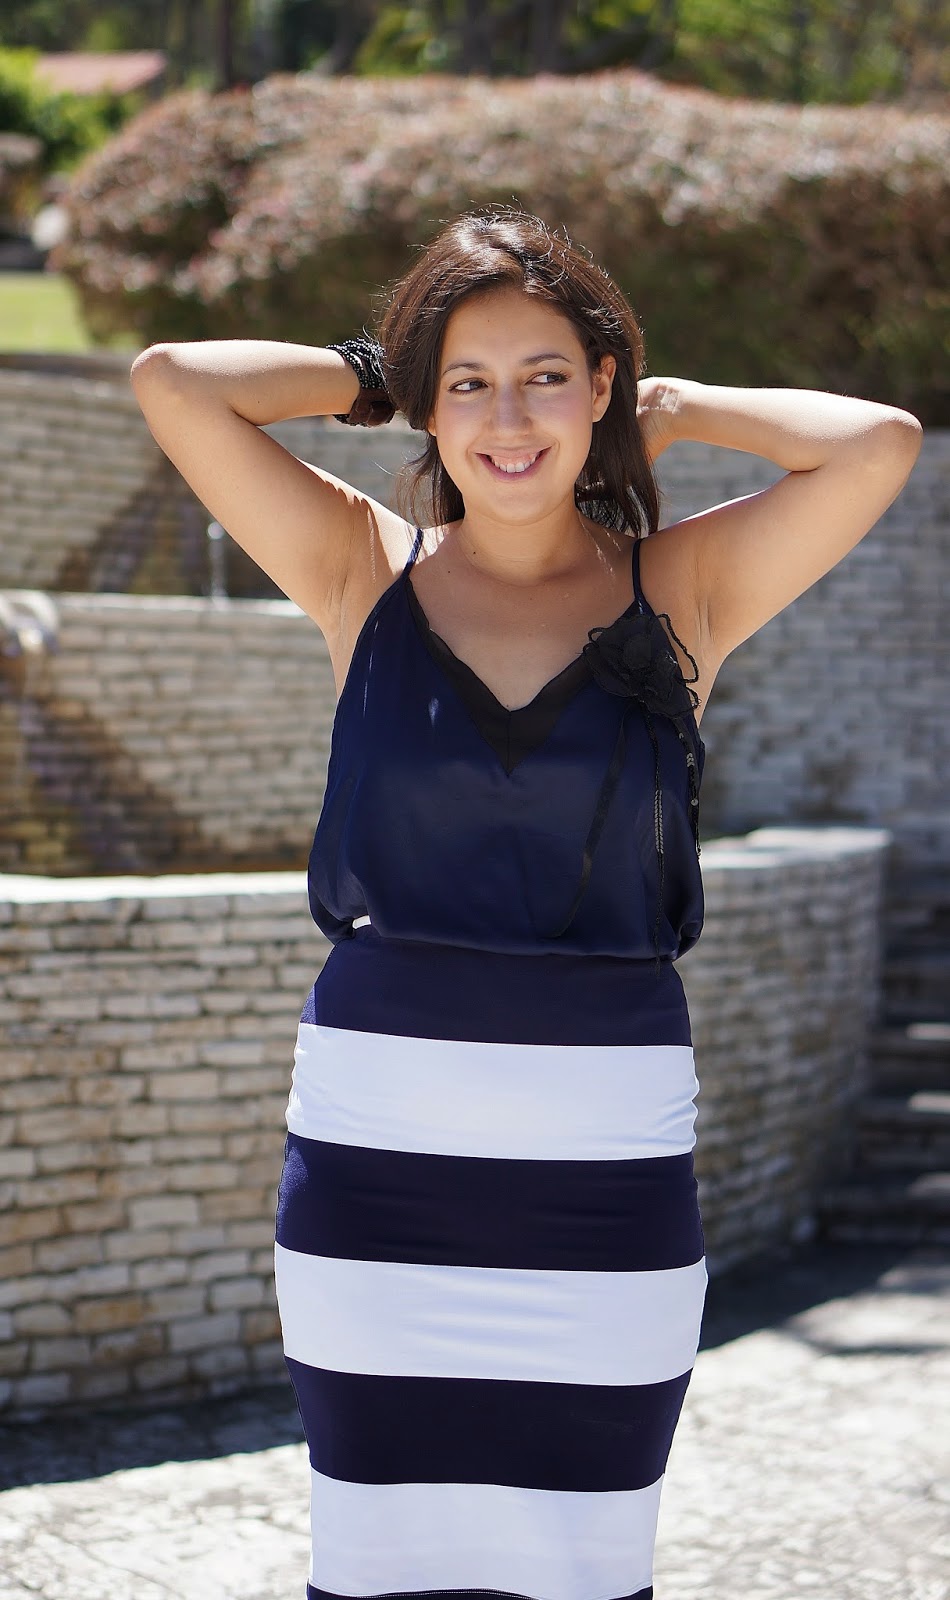 Shoemint Strappy heels, Navy and White Striped Pencil Skirt, Navy Blue Lace camisole